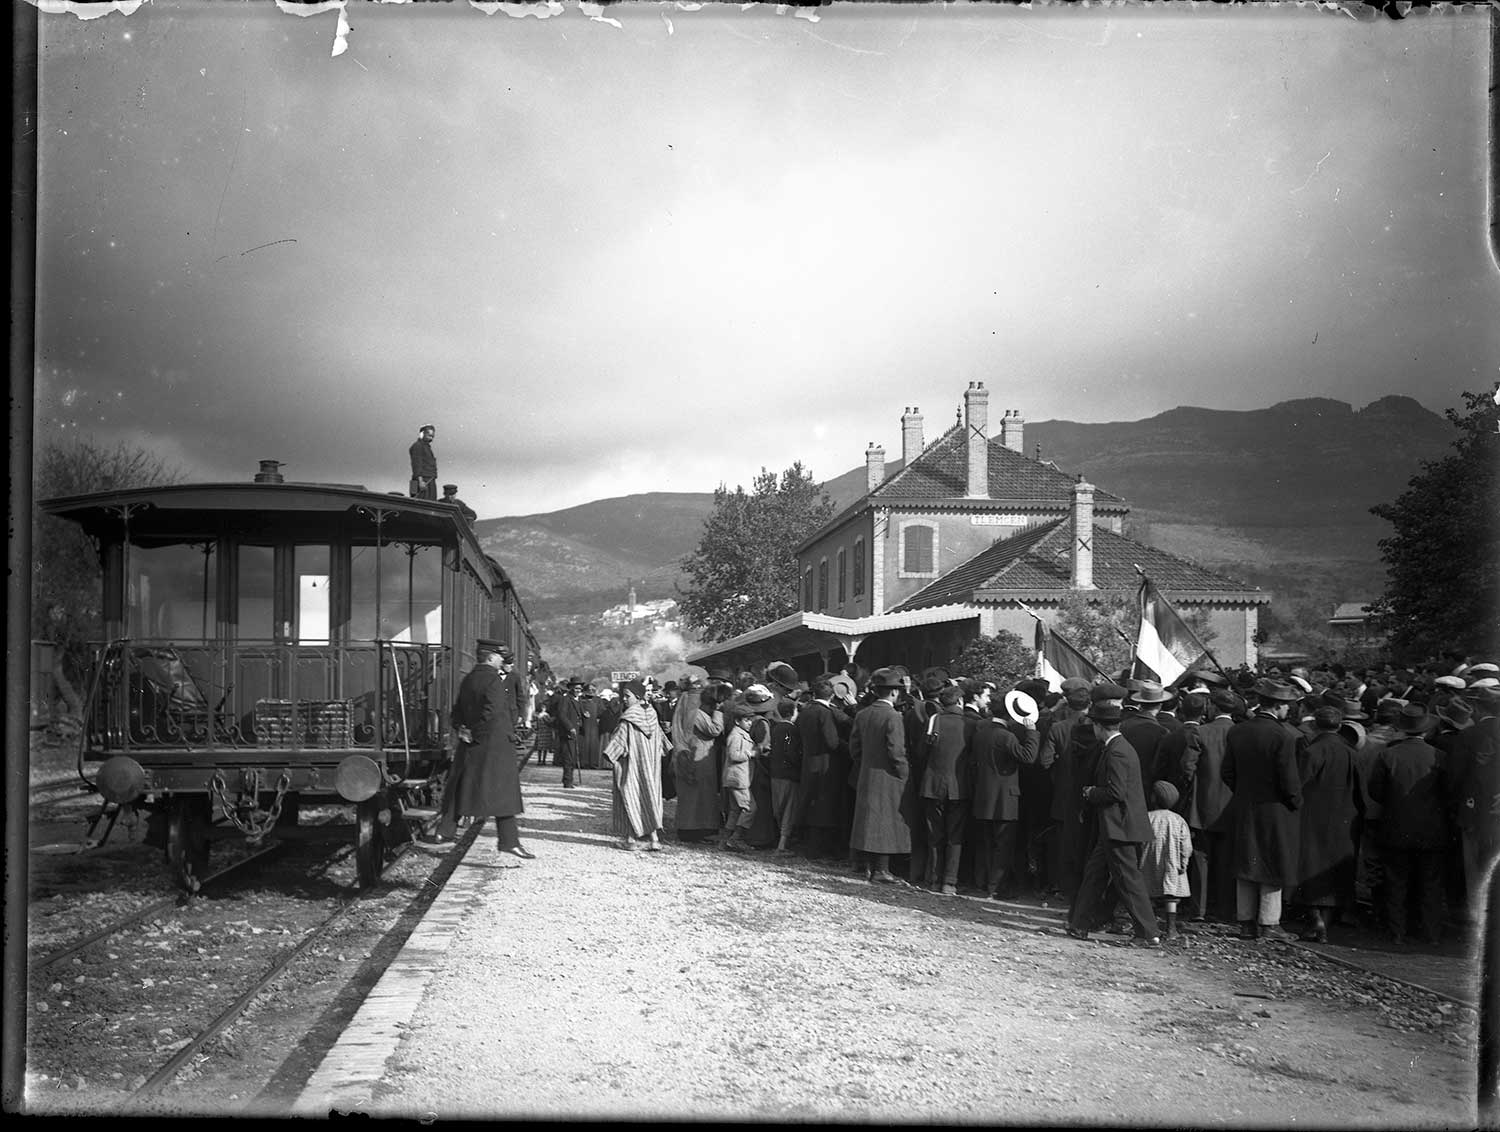 View of train and station house, with crowd waiting by the tracks